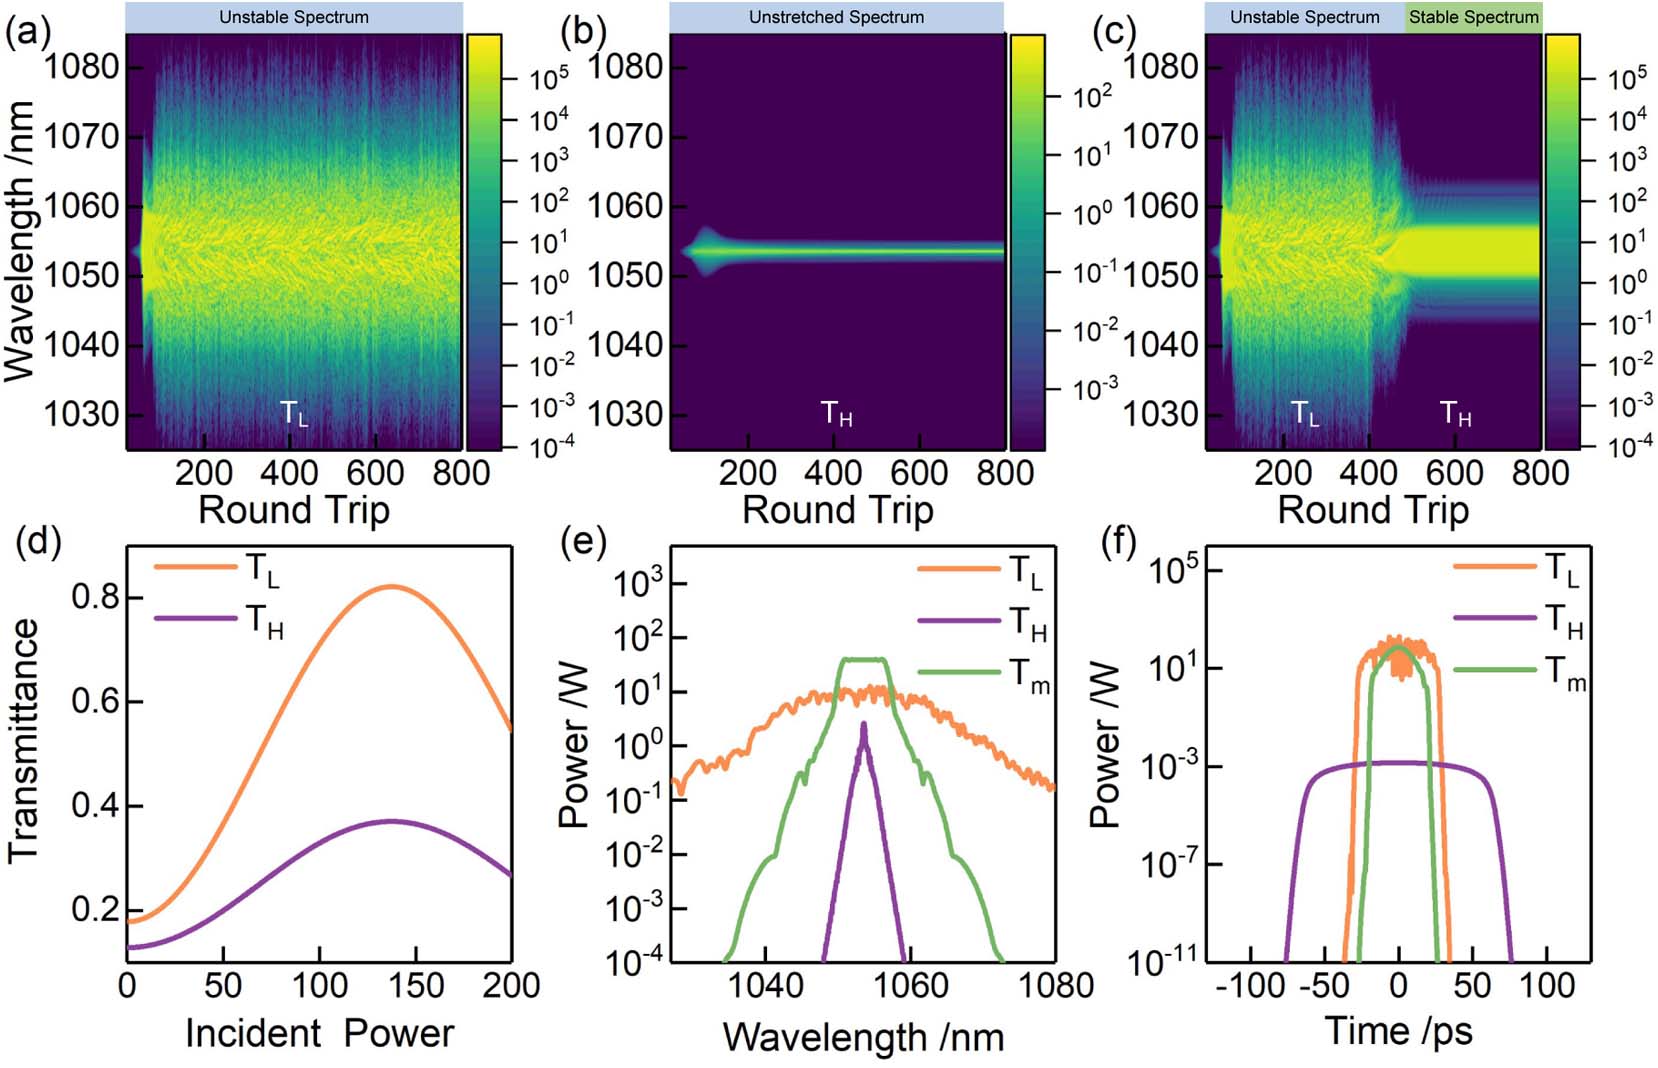 GNLSE simulation result from the NPE-based mode-locking laser system. (a) Spectral evolution when EPC is in TL. (b) Spectral evolution when EPC is in TH. (c) Spectral evolution when EPC is in TL initially and then converted to TH after 400 round trips. (d) Light transmittance caused by NPE when EPC is in TL (orange line) and TH (purple line). (e) Spectrum output after 800 round trips when EPC is in TL (orange line), TH (purple line), and Tm (green line). (f) Temporal output after 800 round trips when EPC is in TL (orange line), TH (purple line), and Tm (green line).